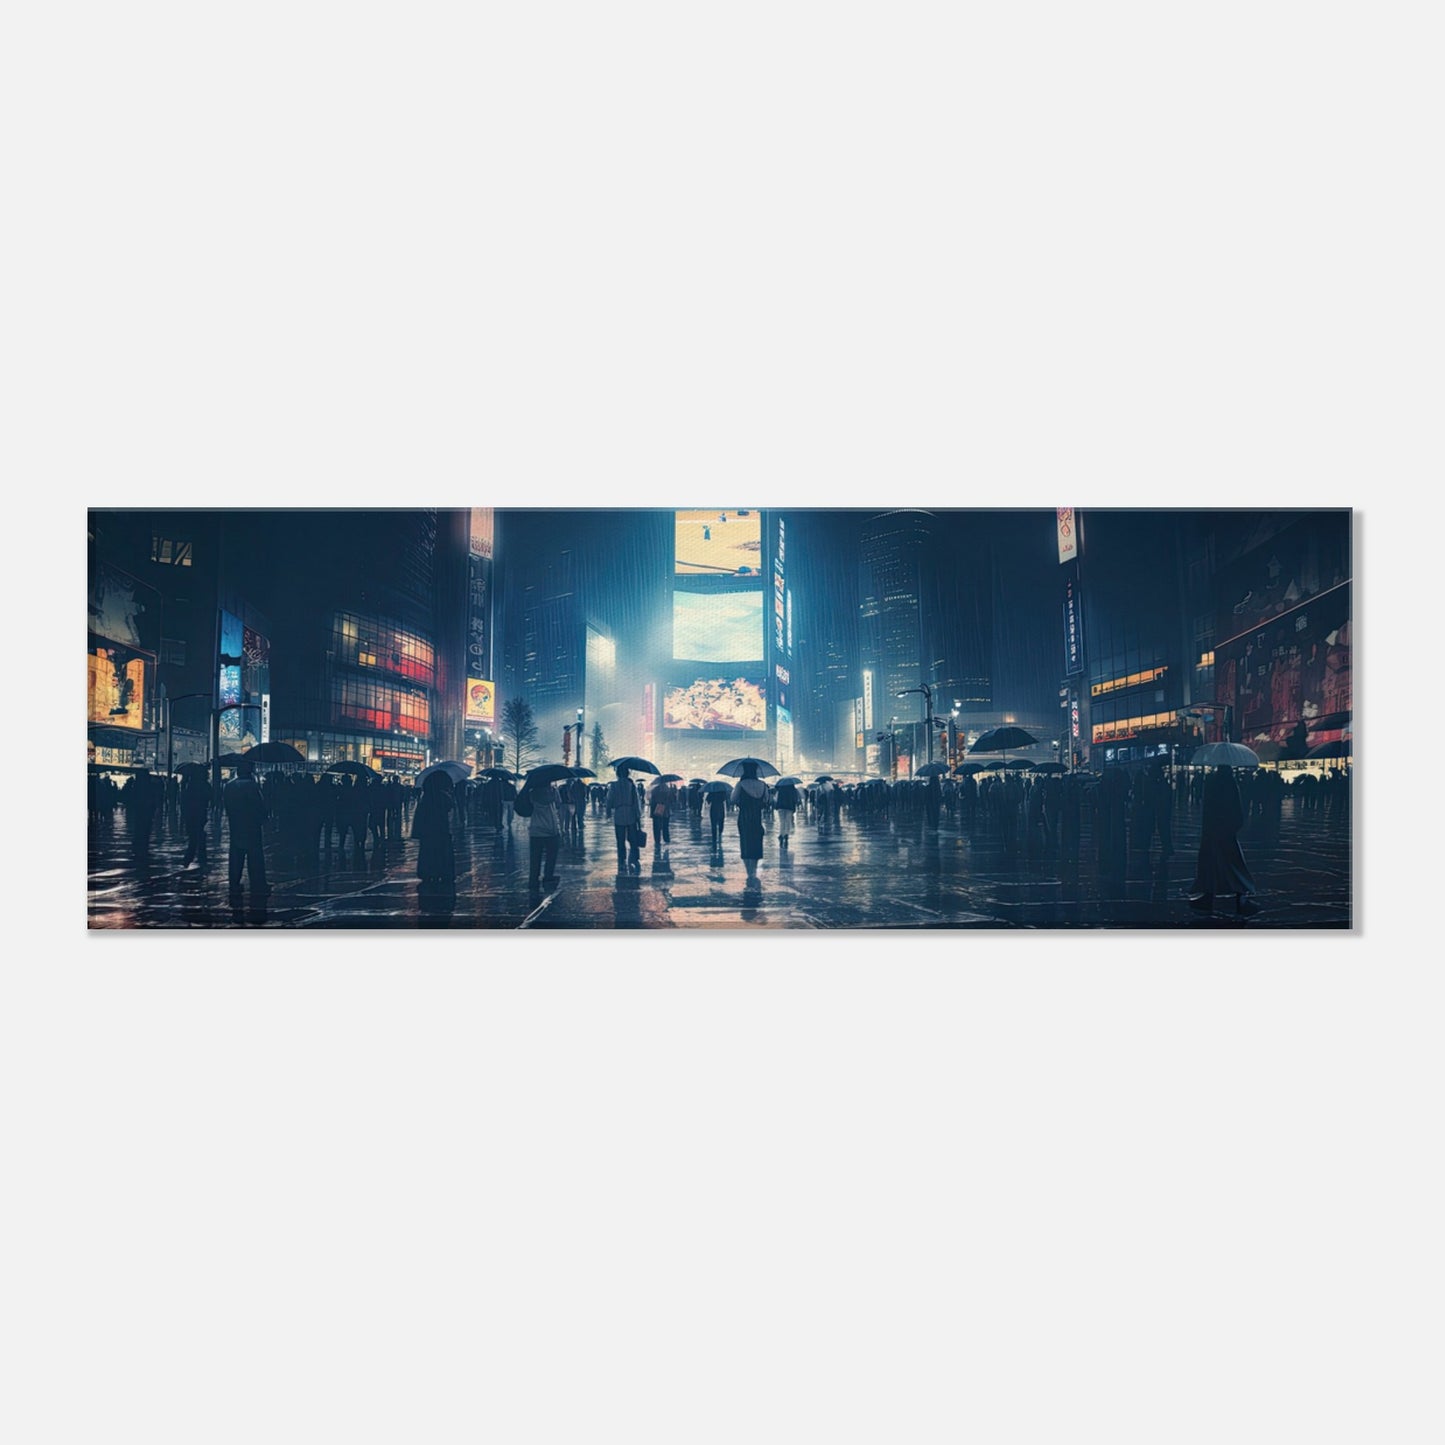 Shibuya Crossing in the Ran Artwork AllStyleArt Thick 20x60 cm / 8x24" 